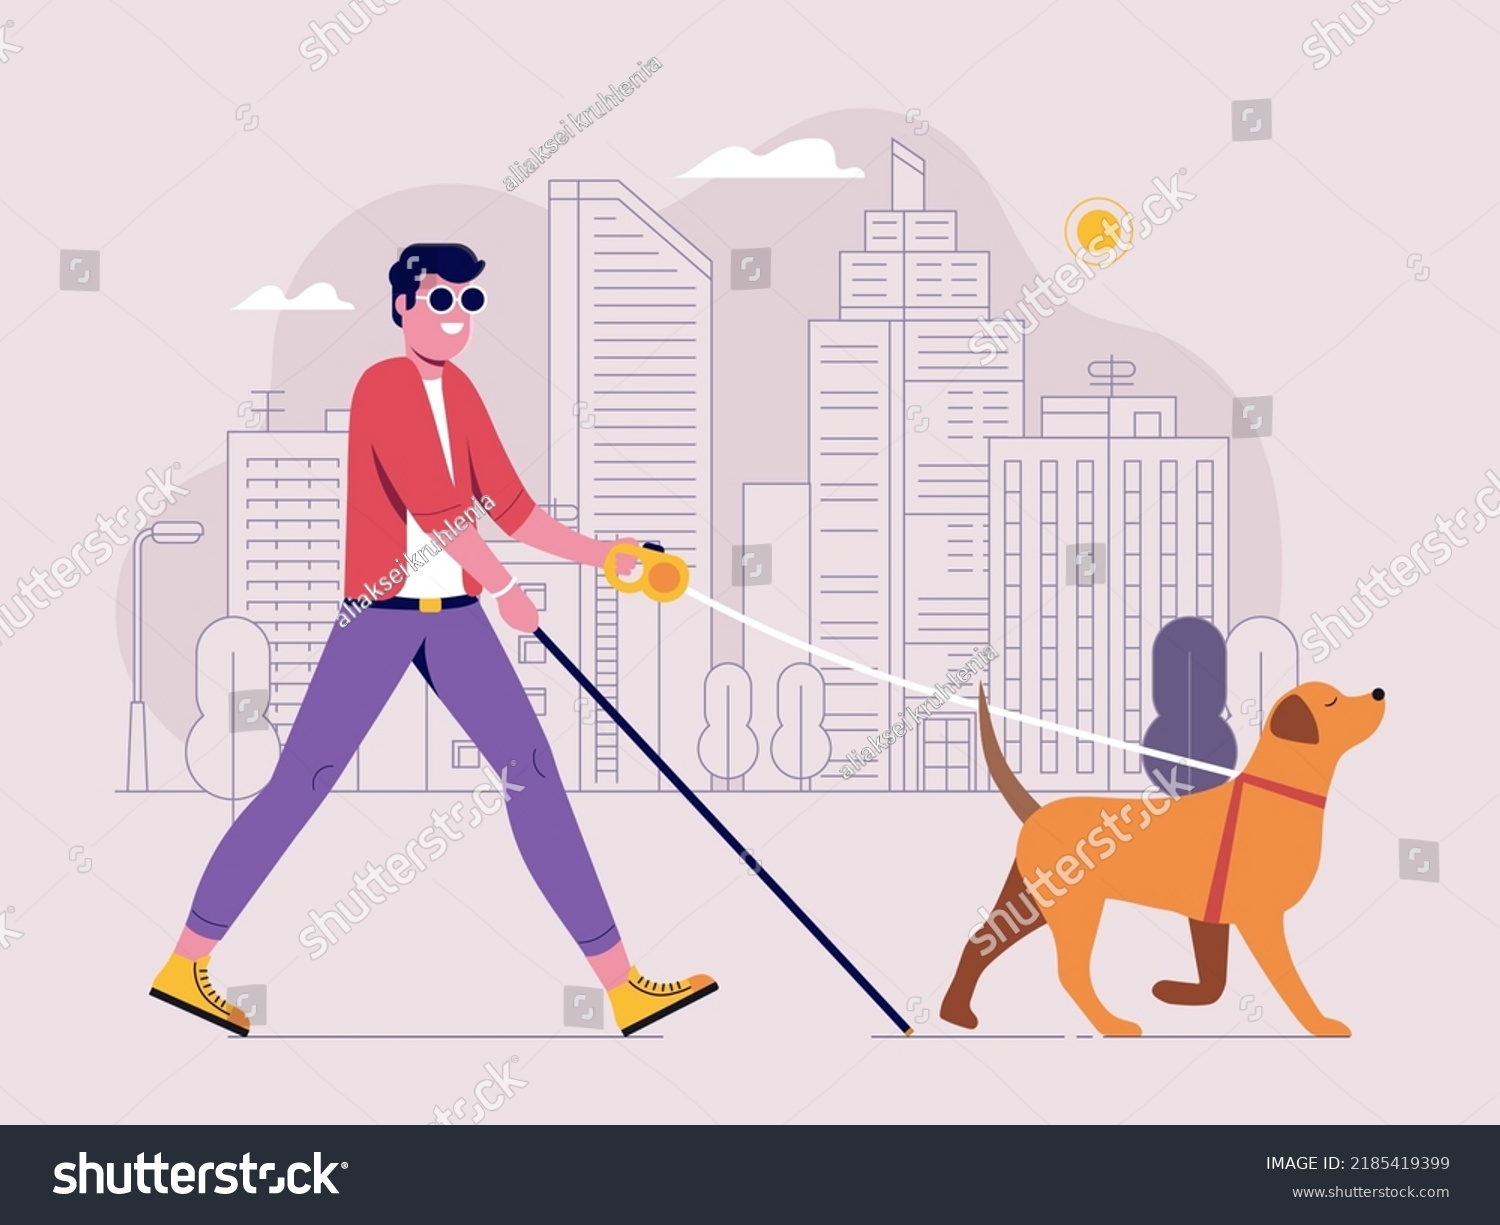 SVG of Blind man walking with guide dog in city. Labrador Retriever leading blind person across the street. Cheerful guy with cane and leader seeing eye dog strolls down street with skyscrapers. svg